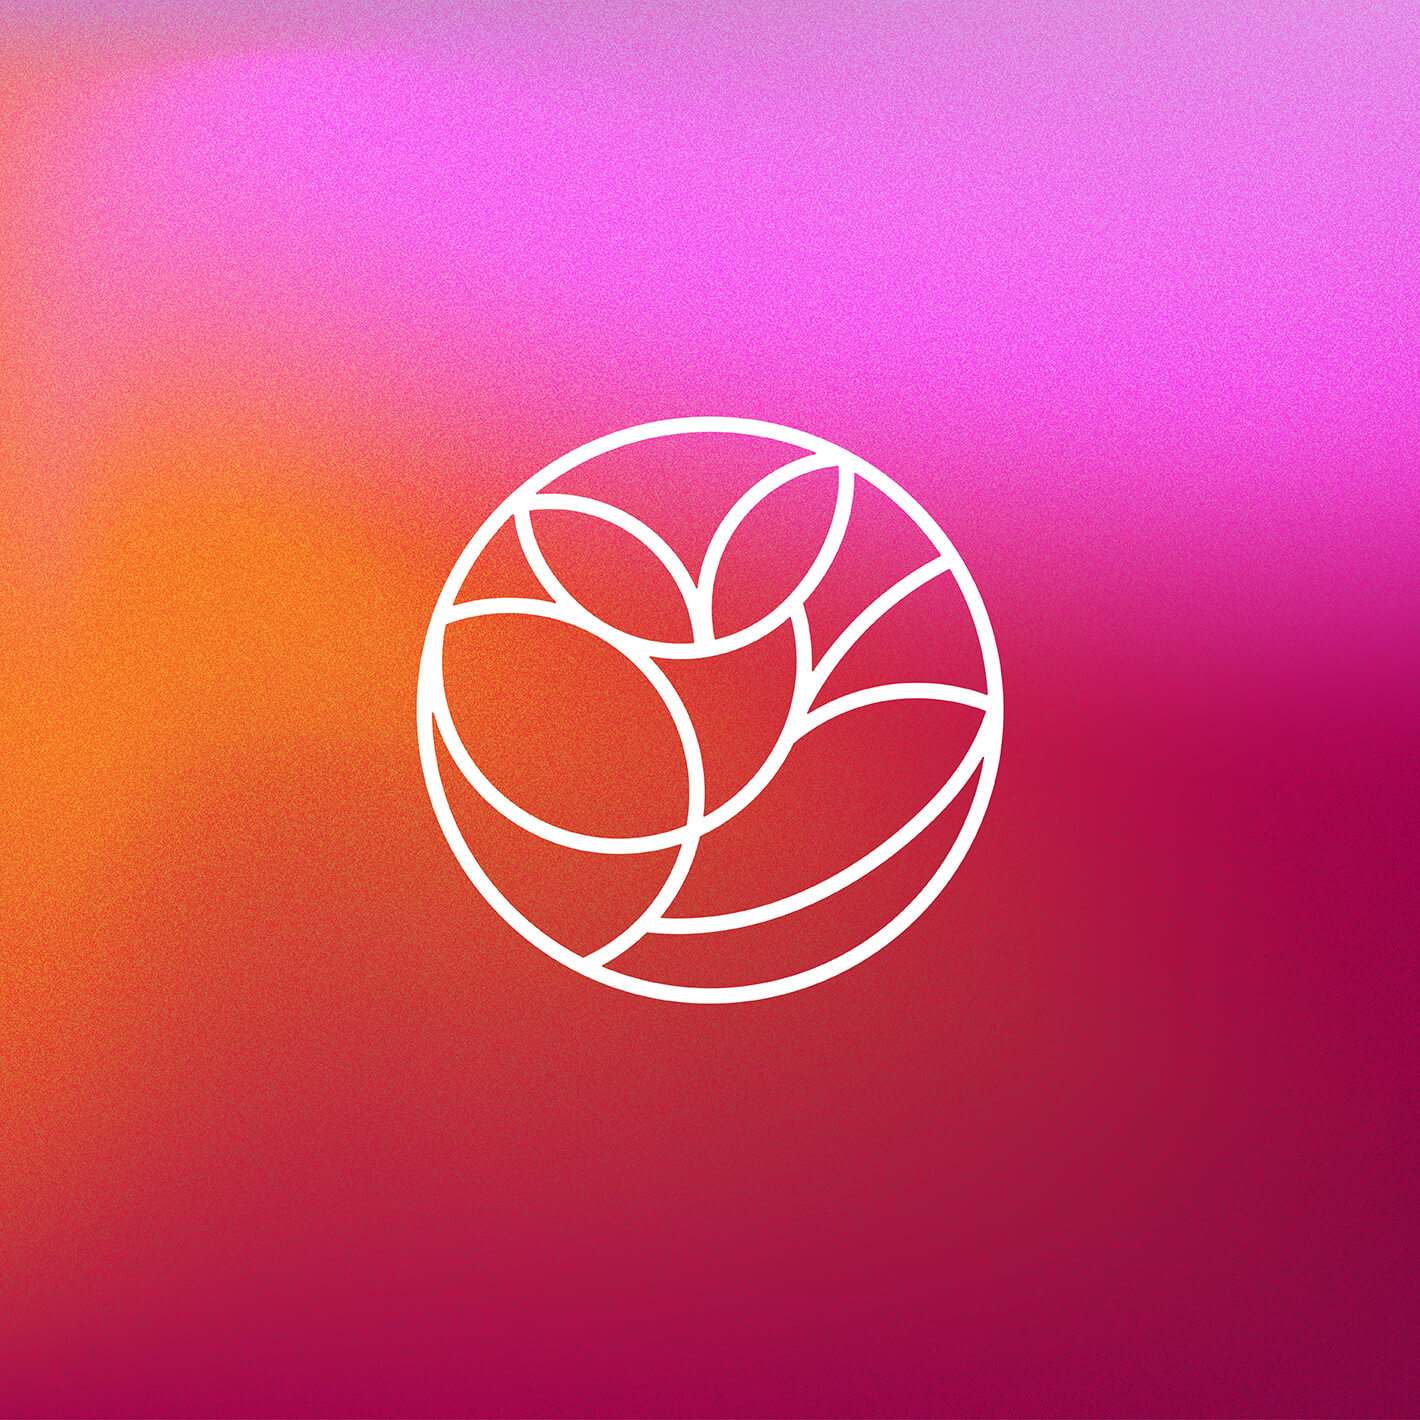 Rebranding case study image of a rich purple, pink and yellow gradient with the HeartRadiance brand icon in white. The mark features curvy lines resembling a flower contained in a circle shape.